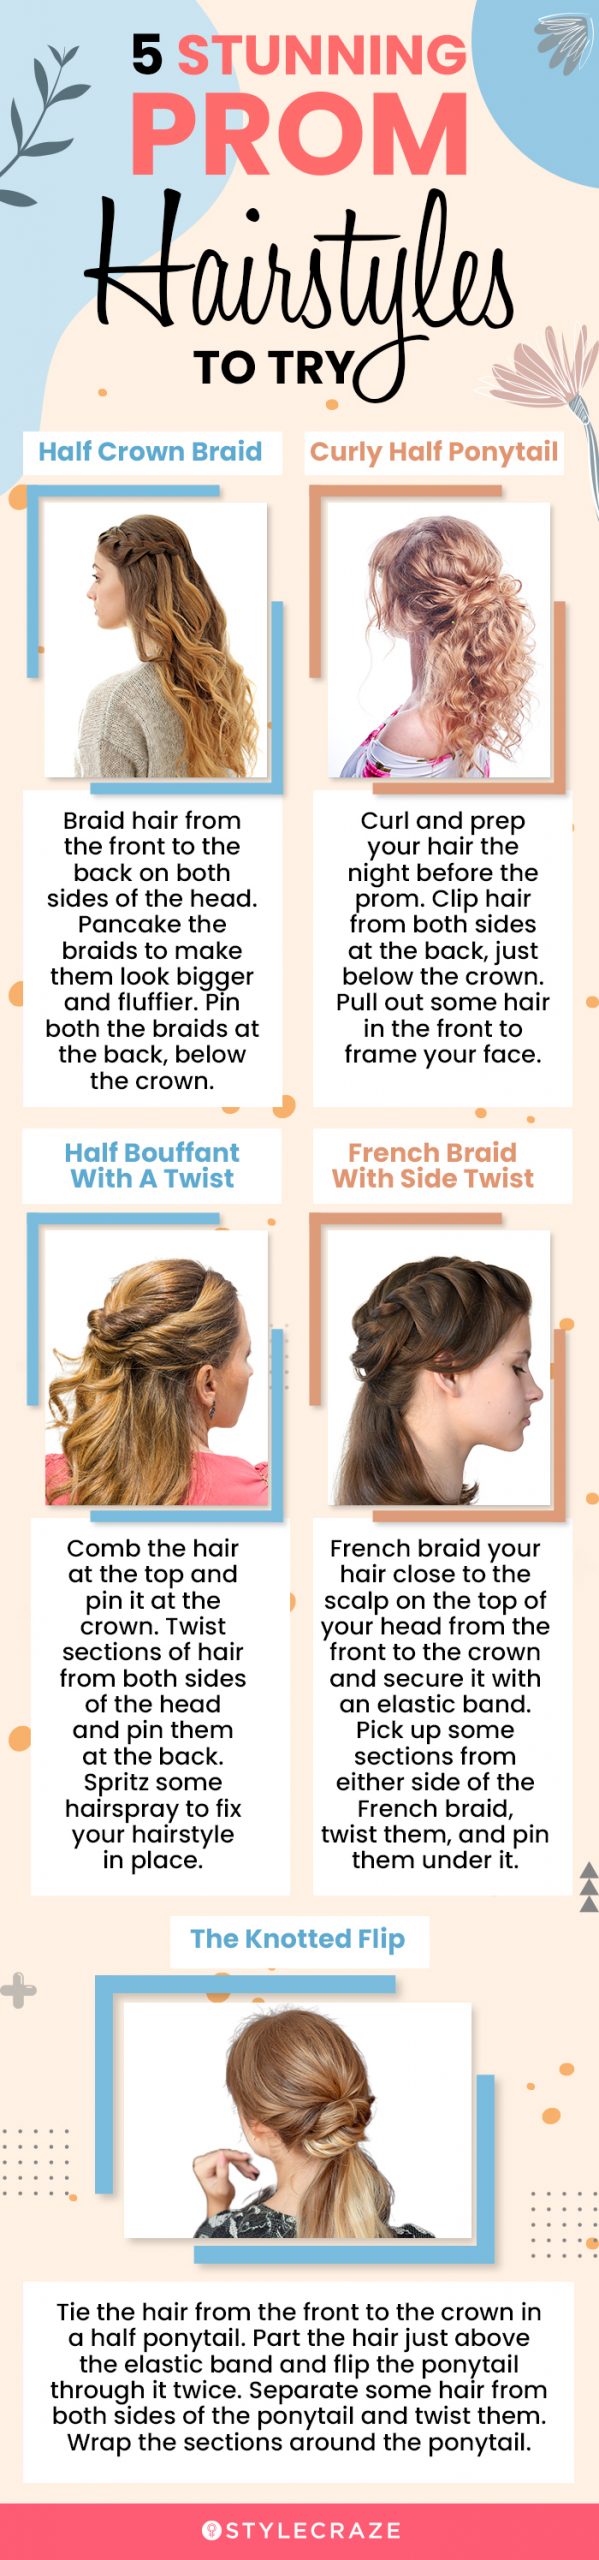 5 stunning prom hairstyles to try (infographic)